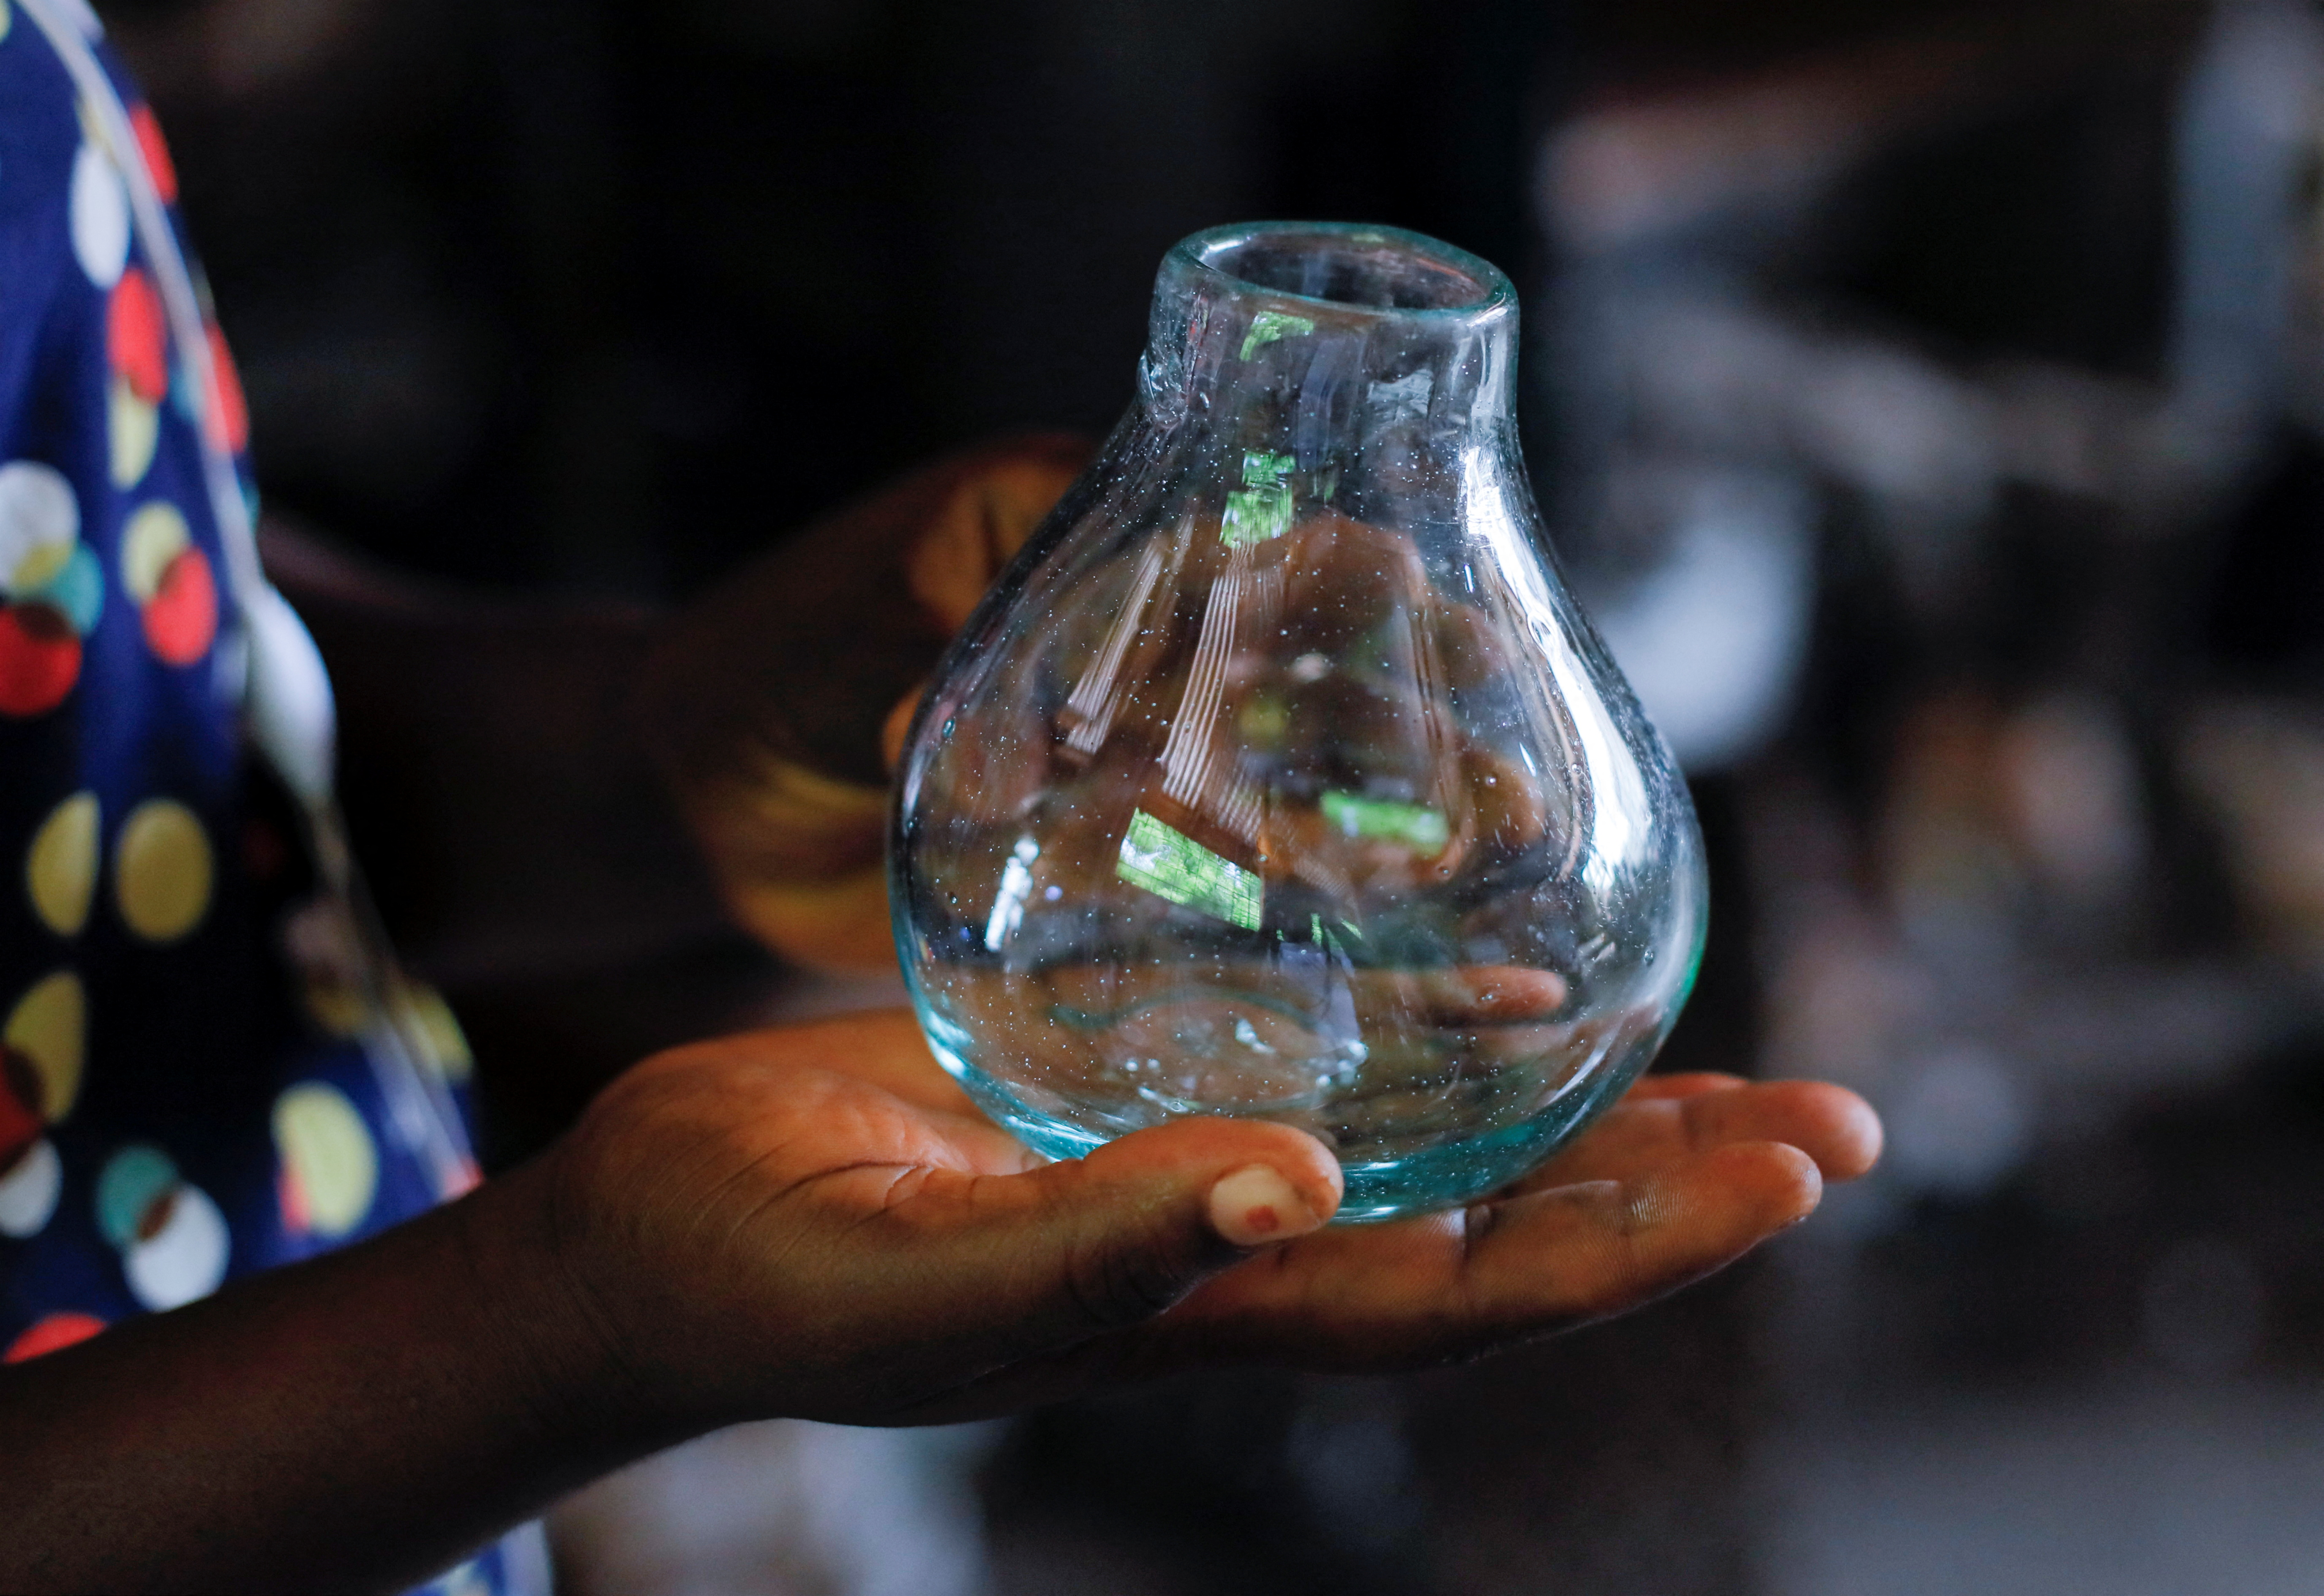 Ghana's only glassblower Michael Tetteh produces glassware at his glassware manufacturing workshop in Krobo Odumase